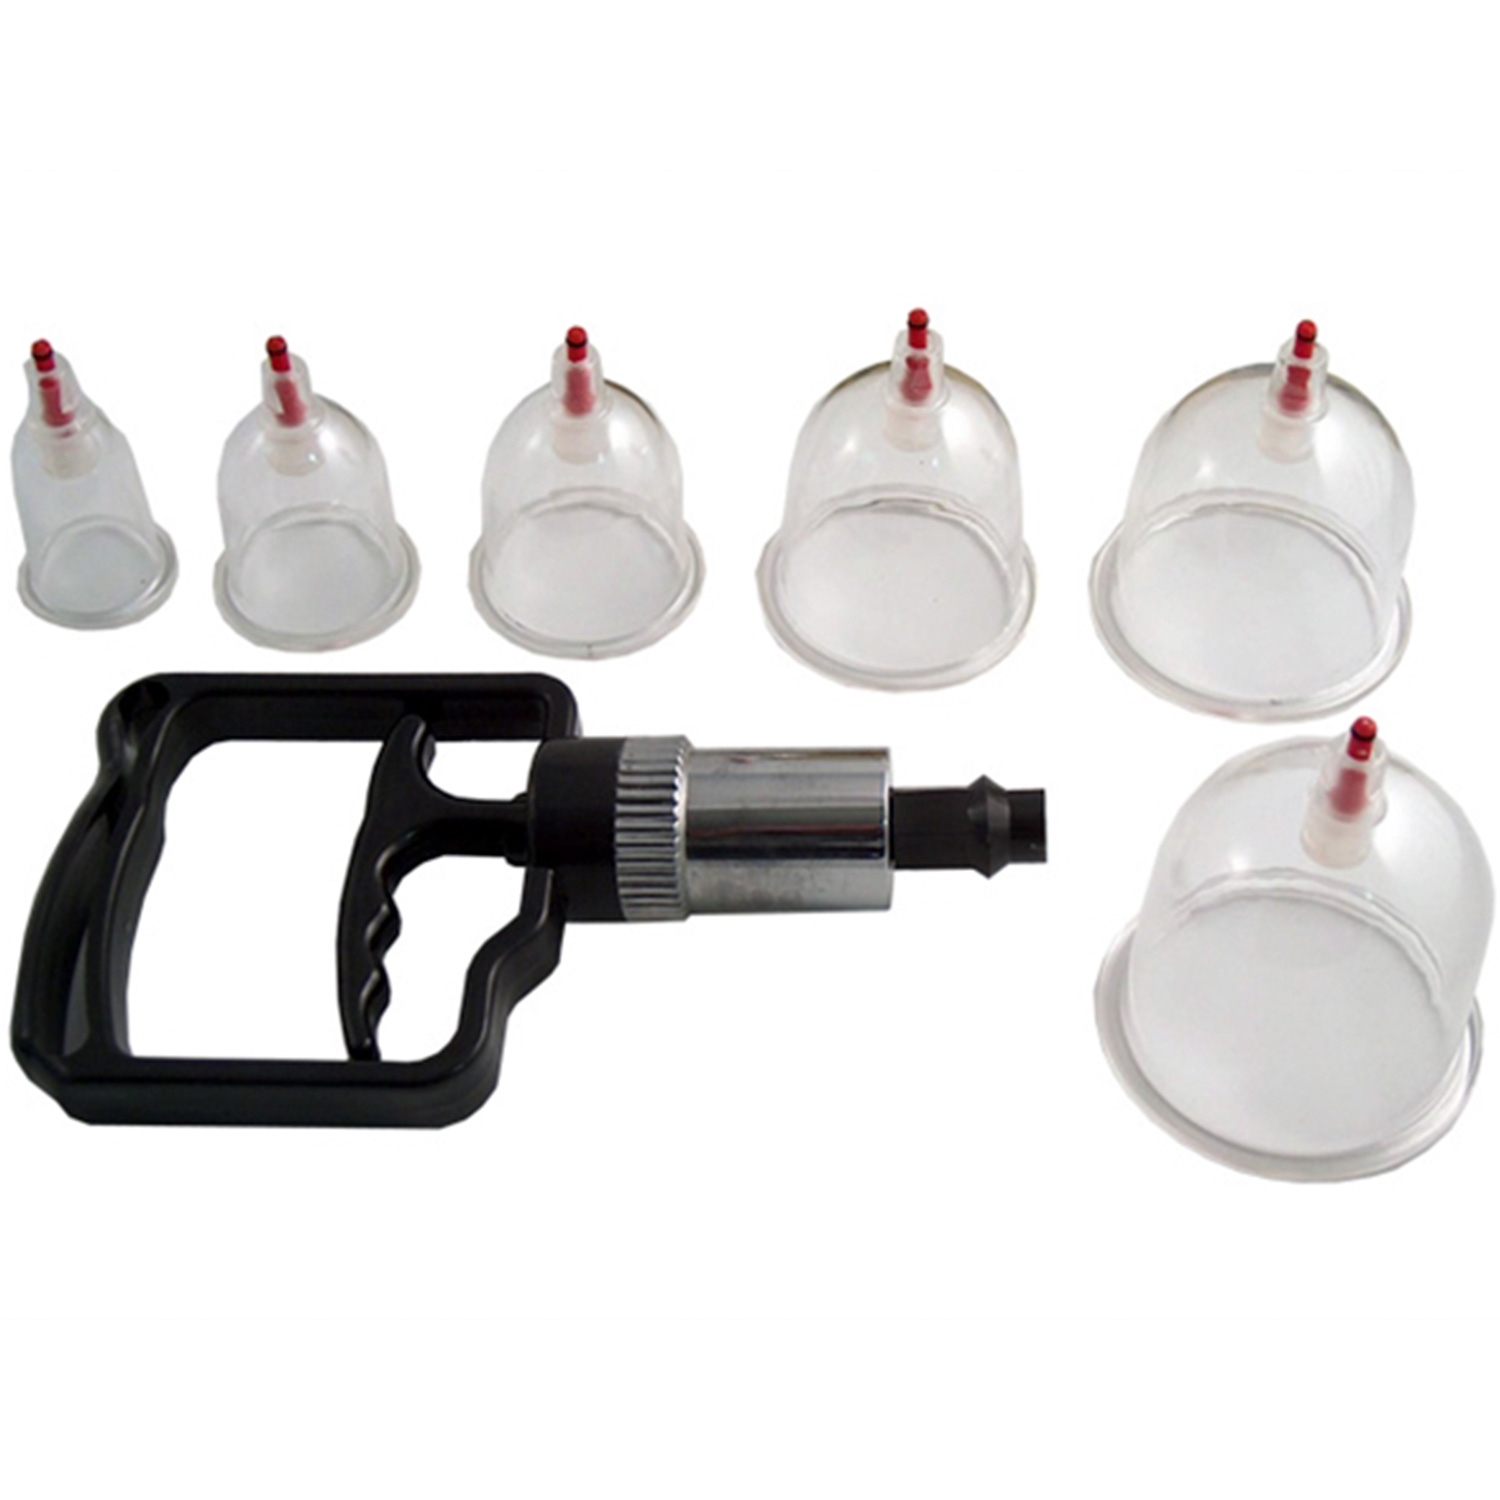 Suction Cupping Set - Mister B